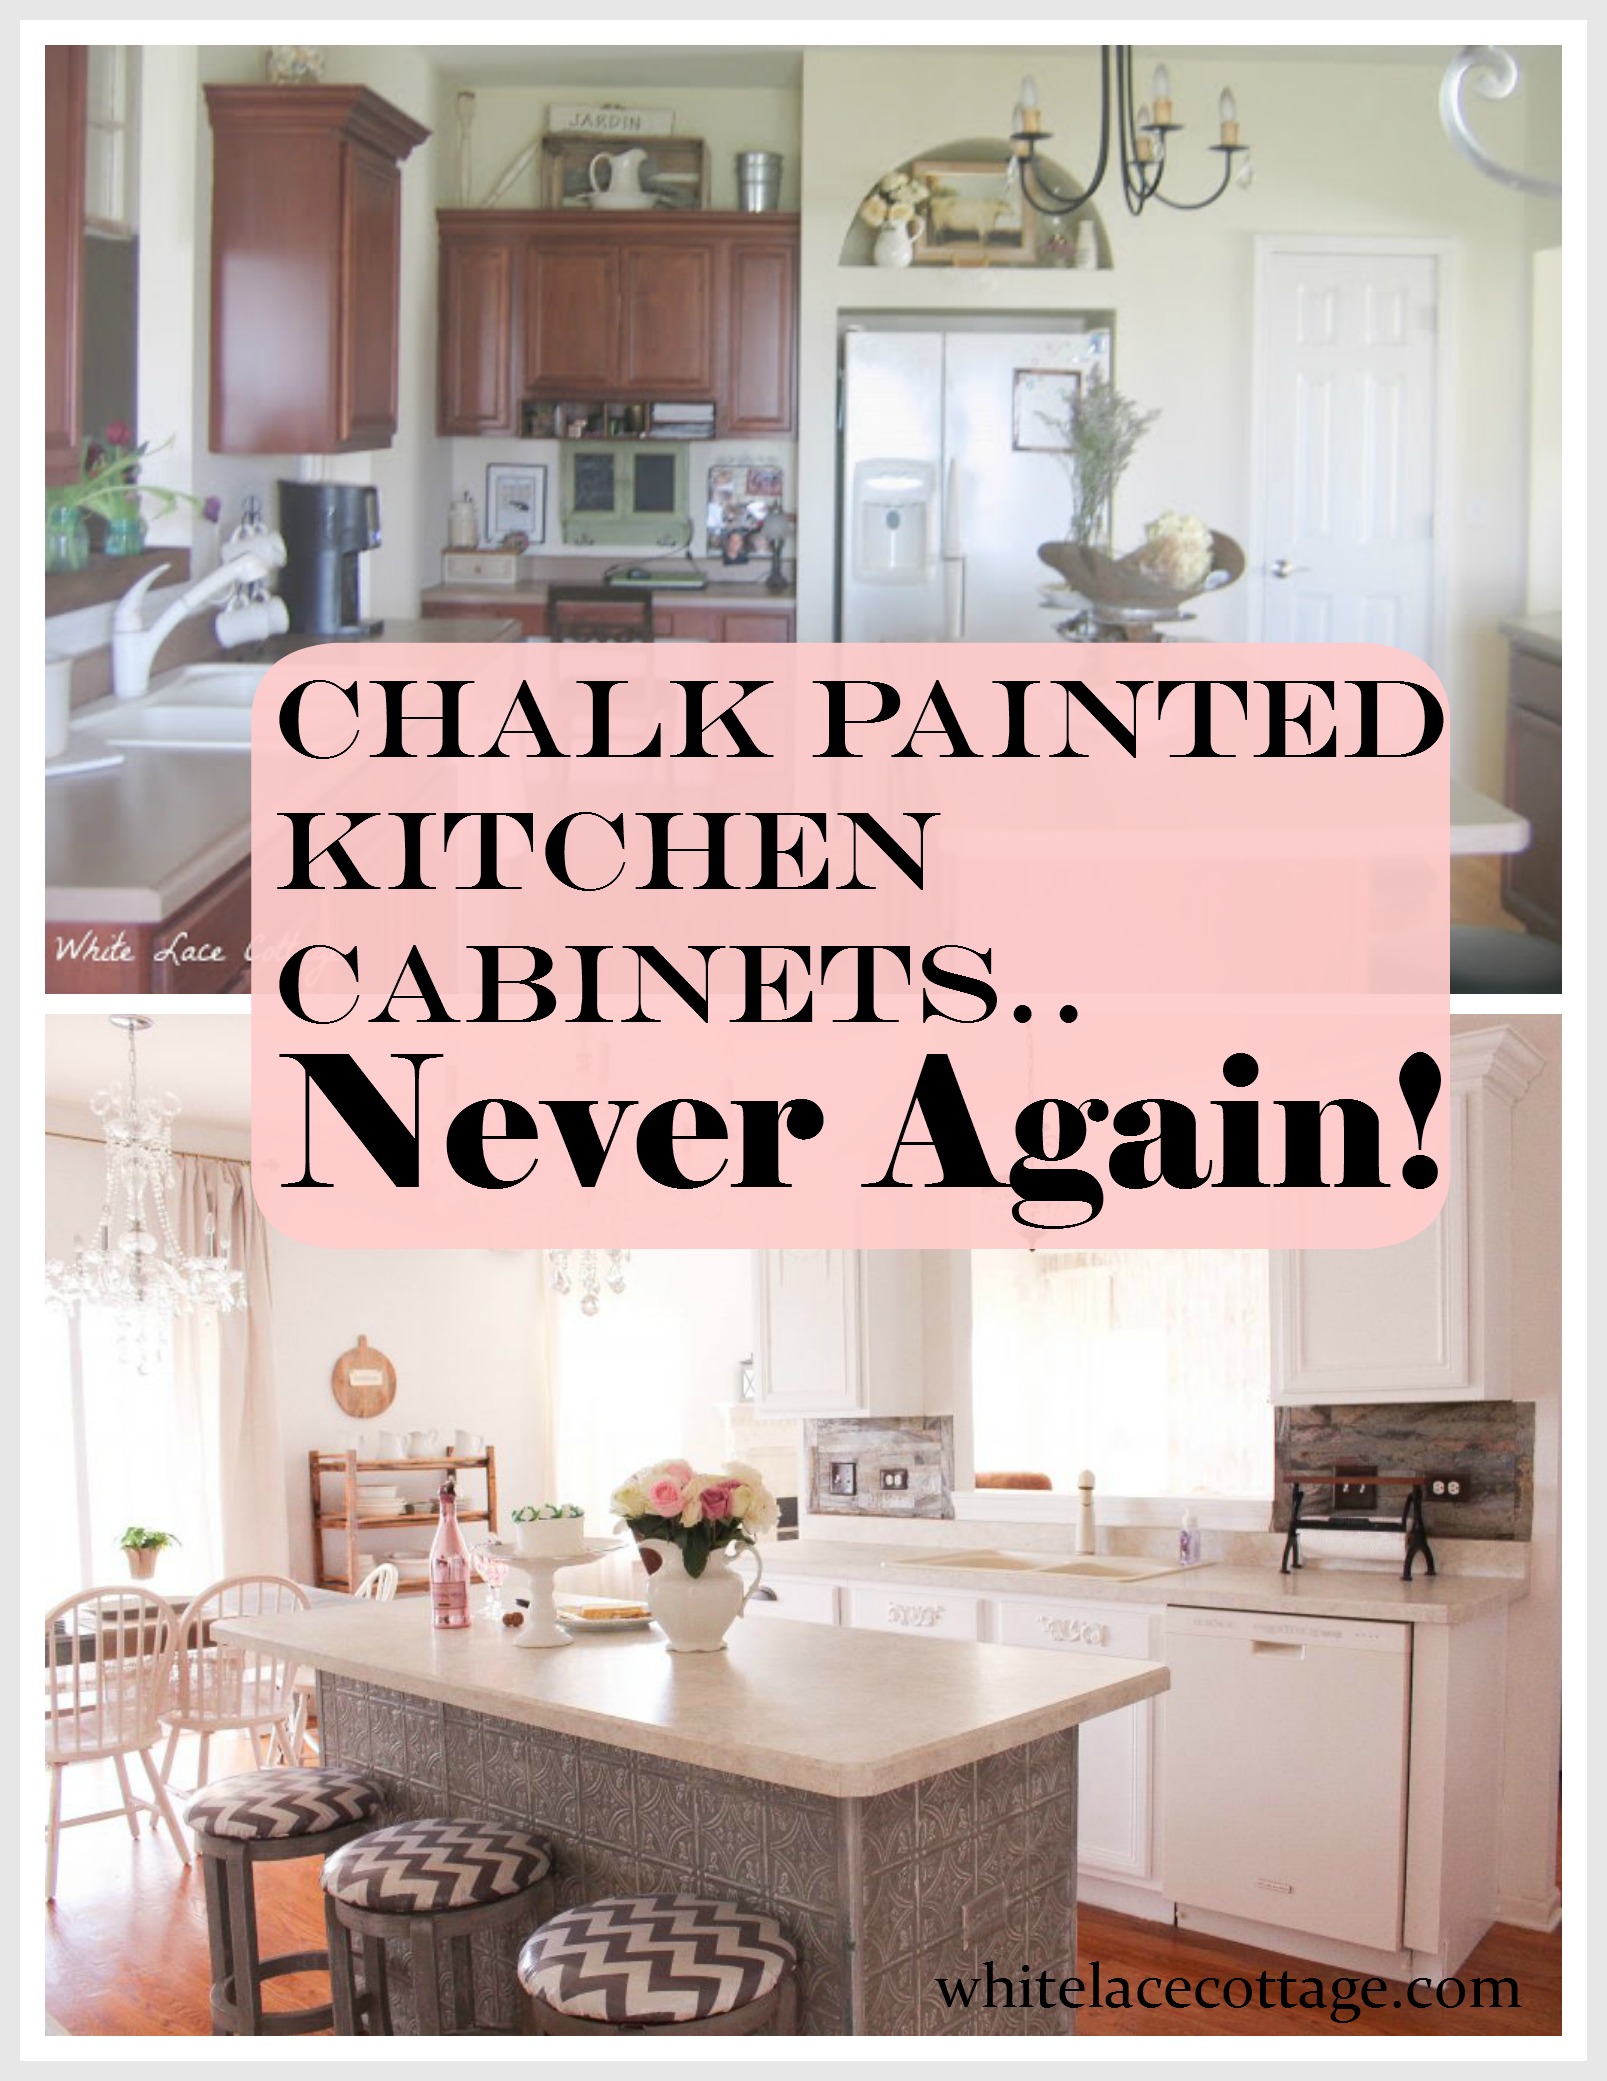 Chalk Painted Kitchen Cabinets Never Again   MAKEUP FOR MATURE SKIN